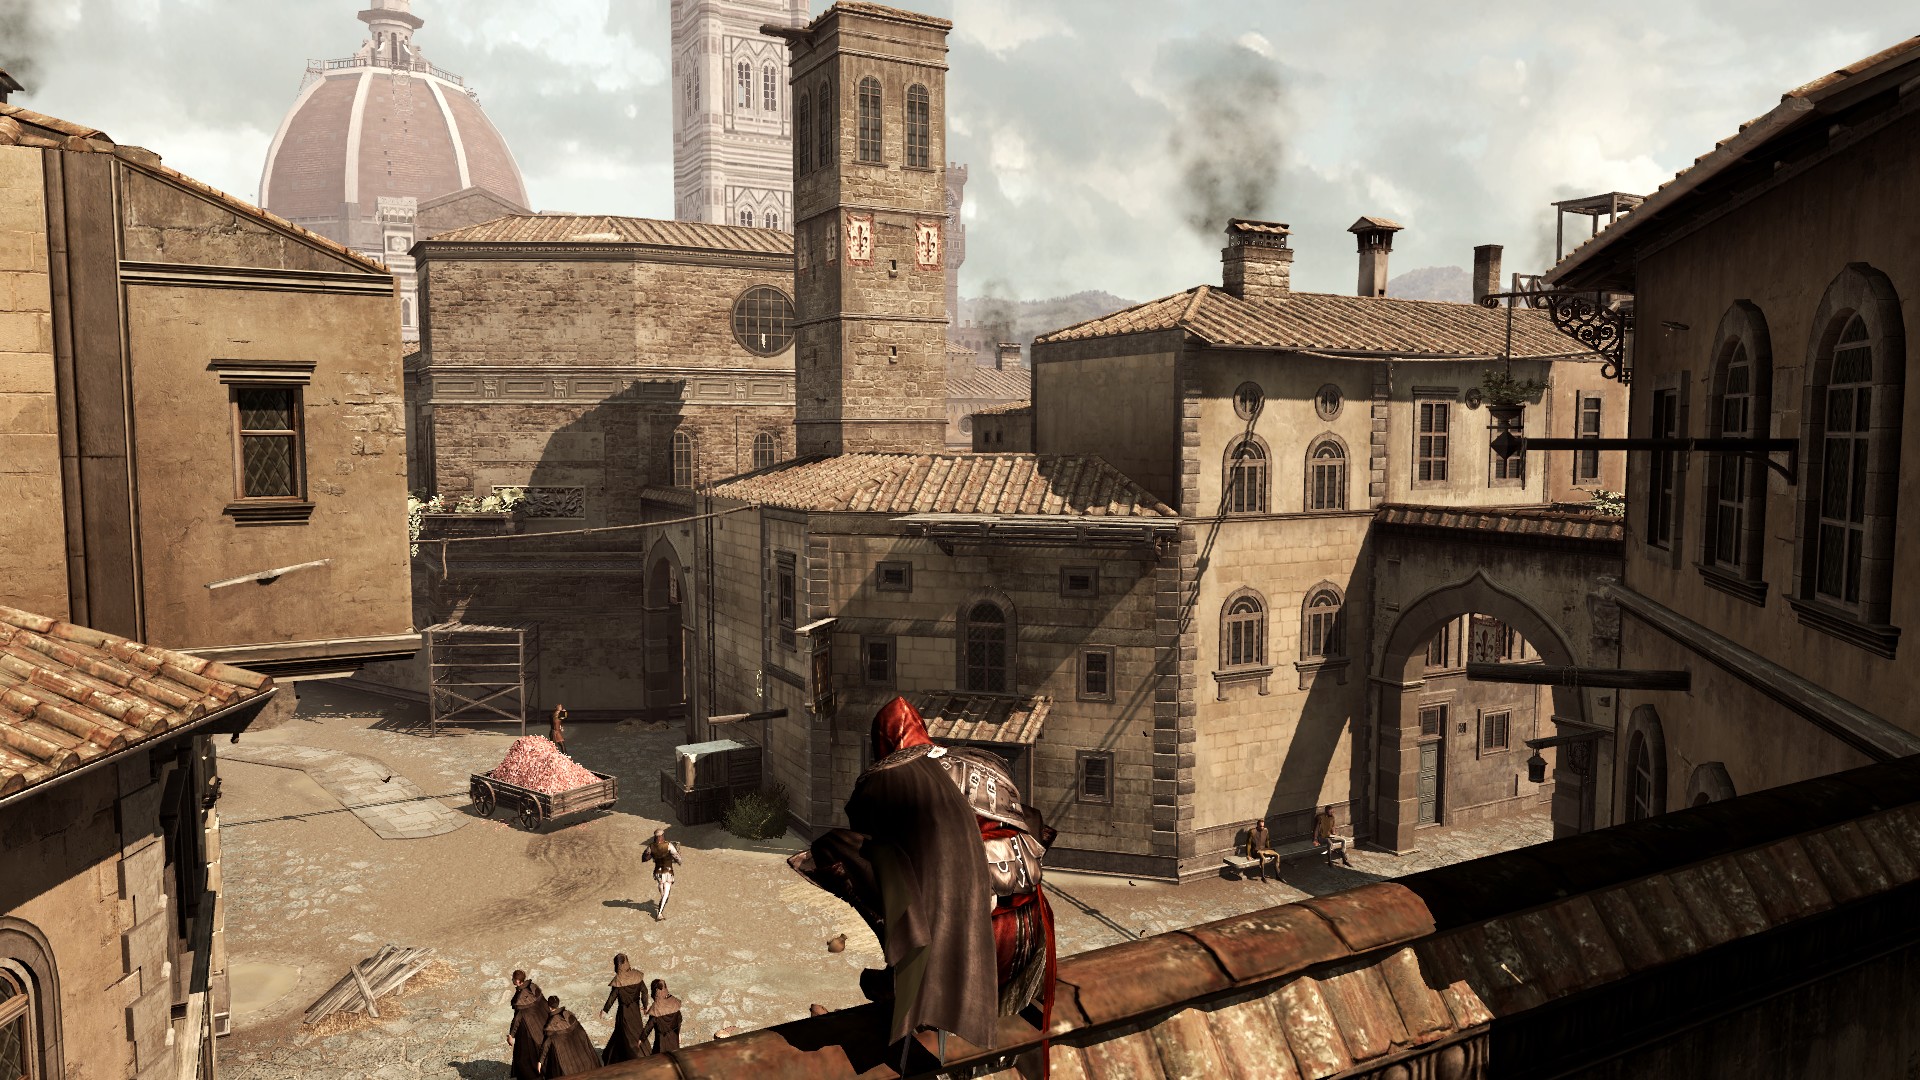 assassins creed 2 pc trainer